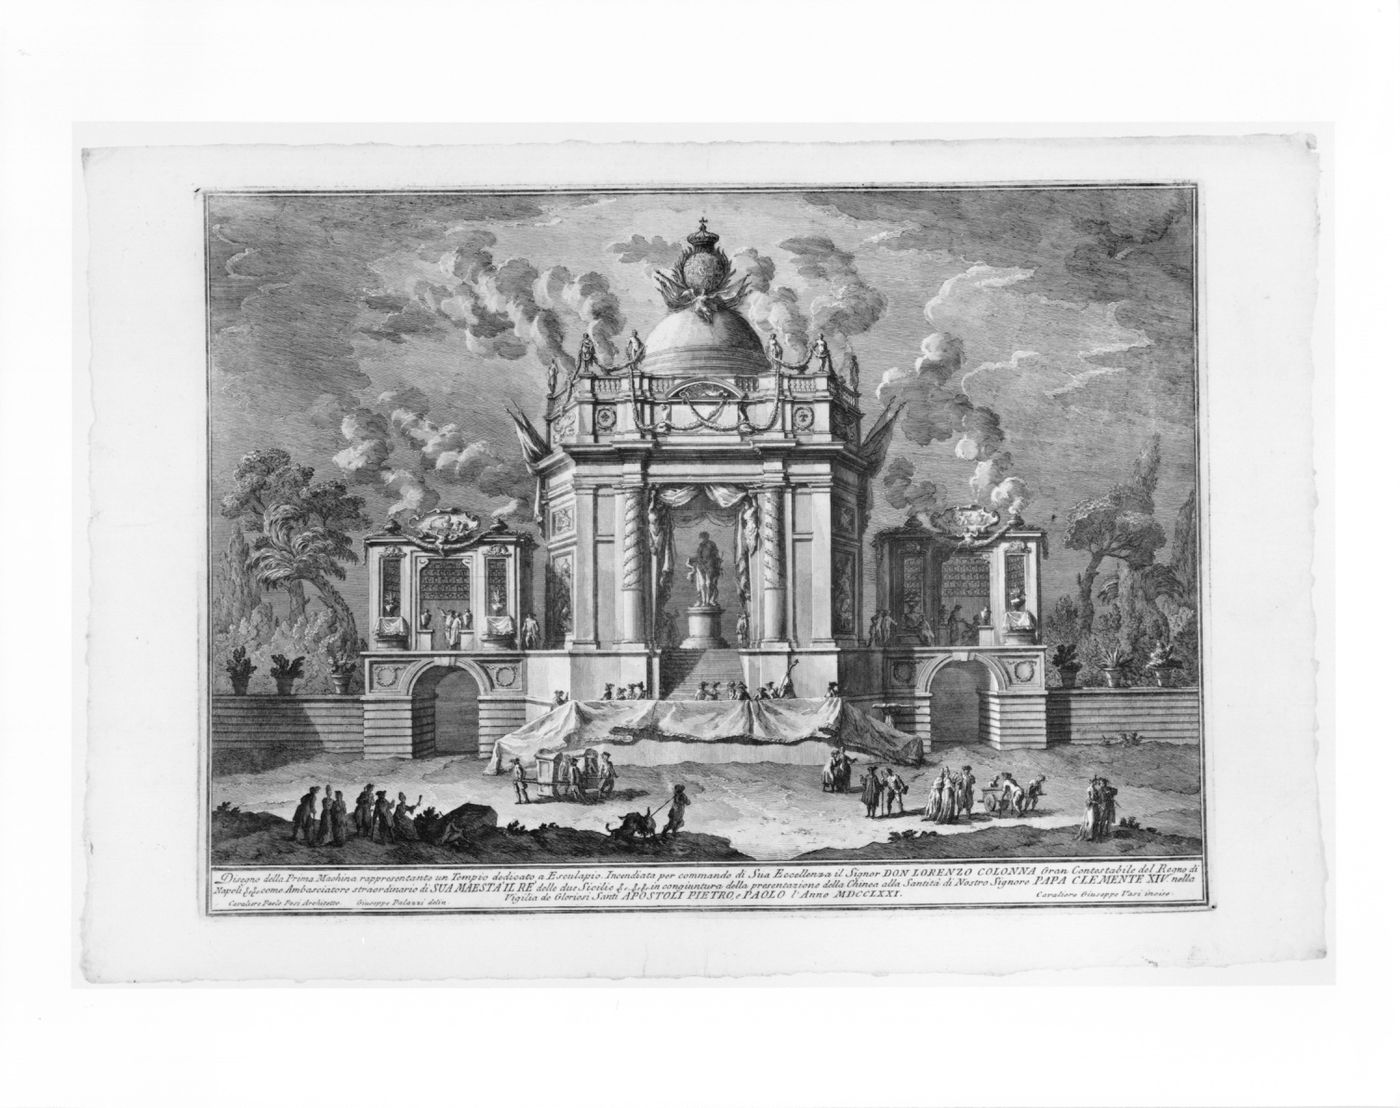 Etching of Posi's design for the "prima macchina" of 1771